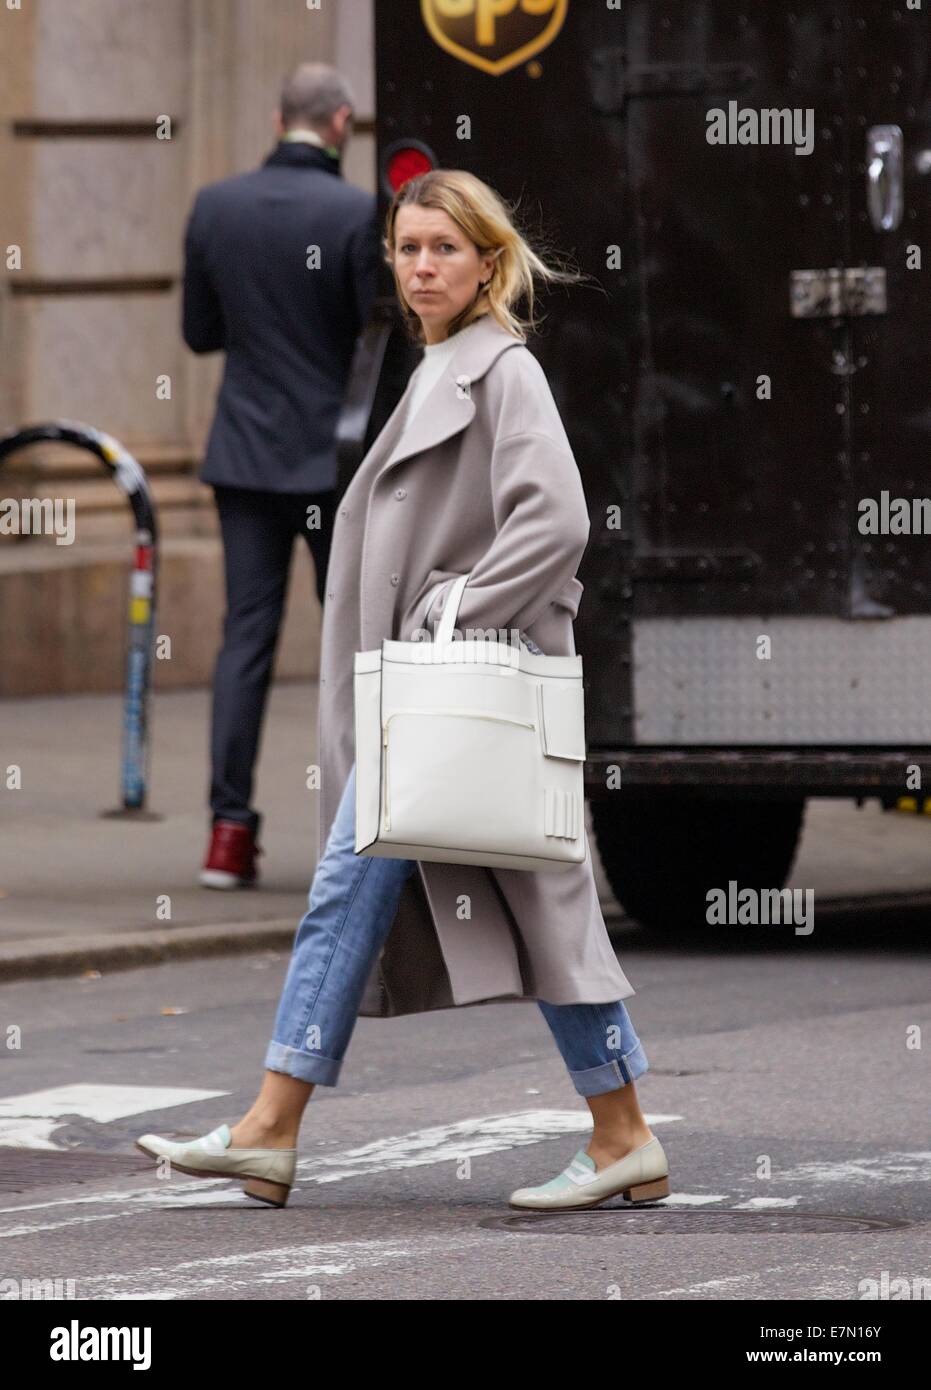 Fashion consultant Natalie Joos out and about in SoHo  Featuring: Natalie Joos Where: New York City, New York, United States When: 19 Mar 2014 Stock Photo